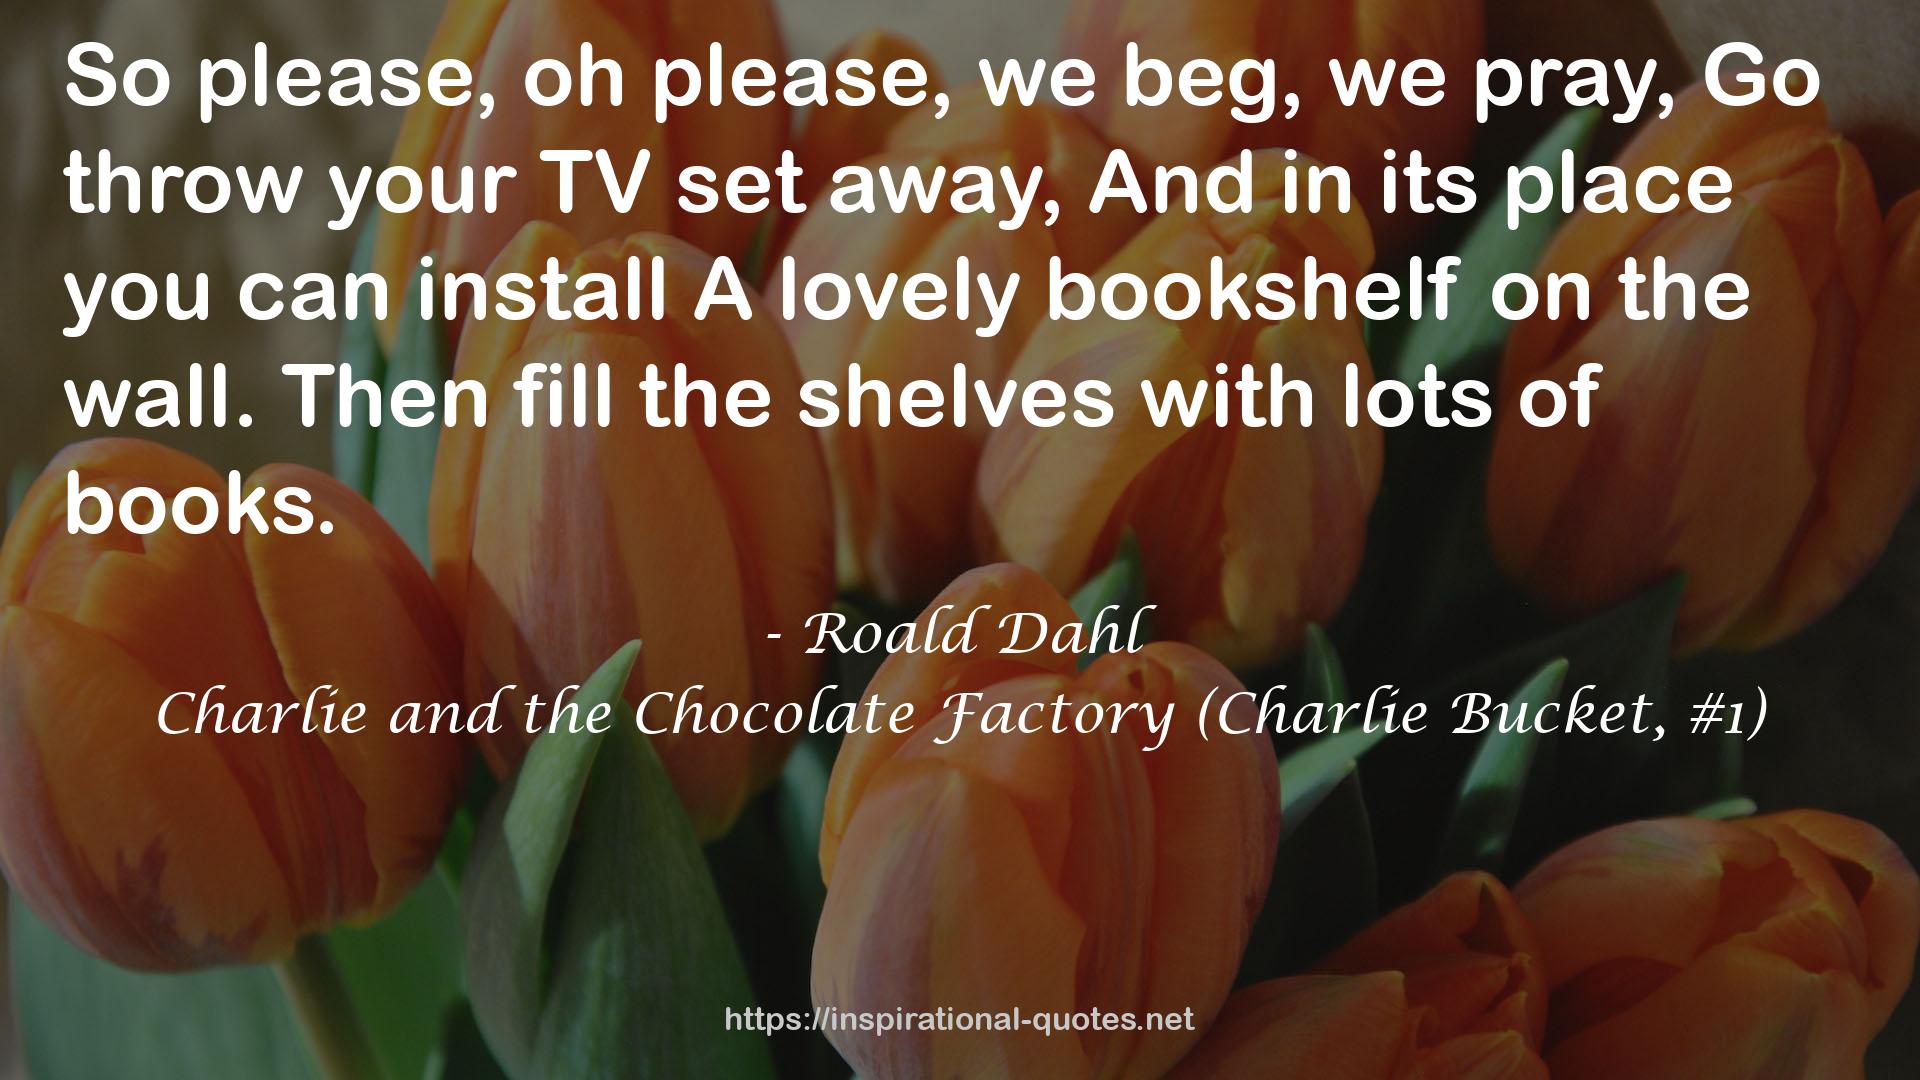 Charlie and the Chocolate Factory (Charlie Bucket, #1) QUOTES